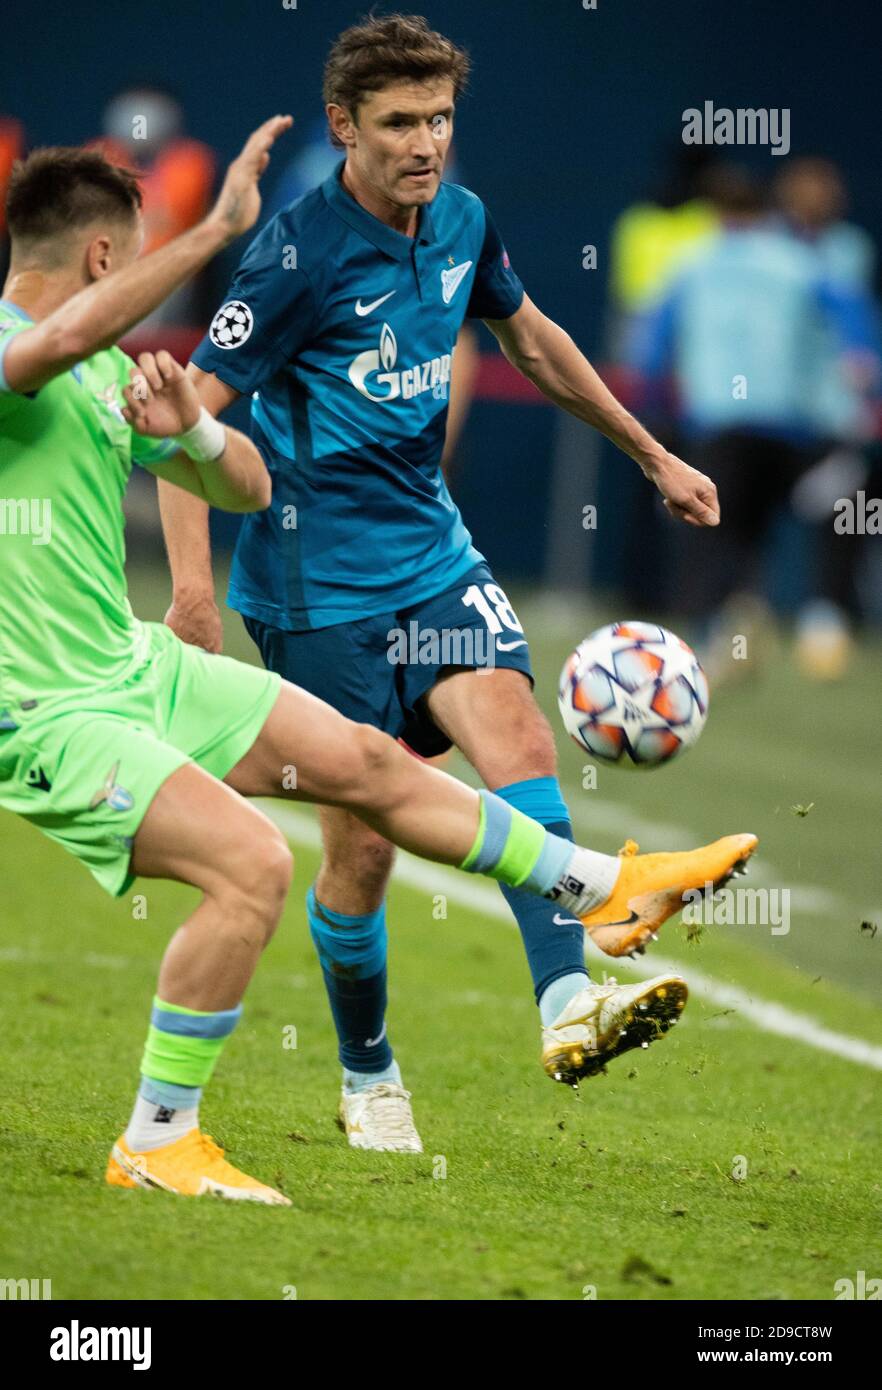 SAINT PETERSBURG, RUSSIA - NOVEMBER 04: Yuri Zhirkov of Zenit St Petersburg during the UEFA Champions League Group F stage match between Zenit St. Petersburg and SS Lazio at Gazprom Arena on November 4, 2020 in Saint Petersburg, Russia. (Photo by MB Media) Stock Photo